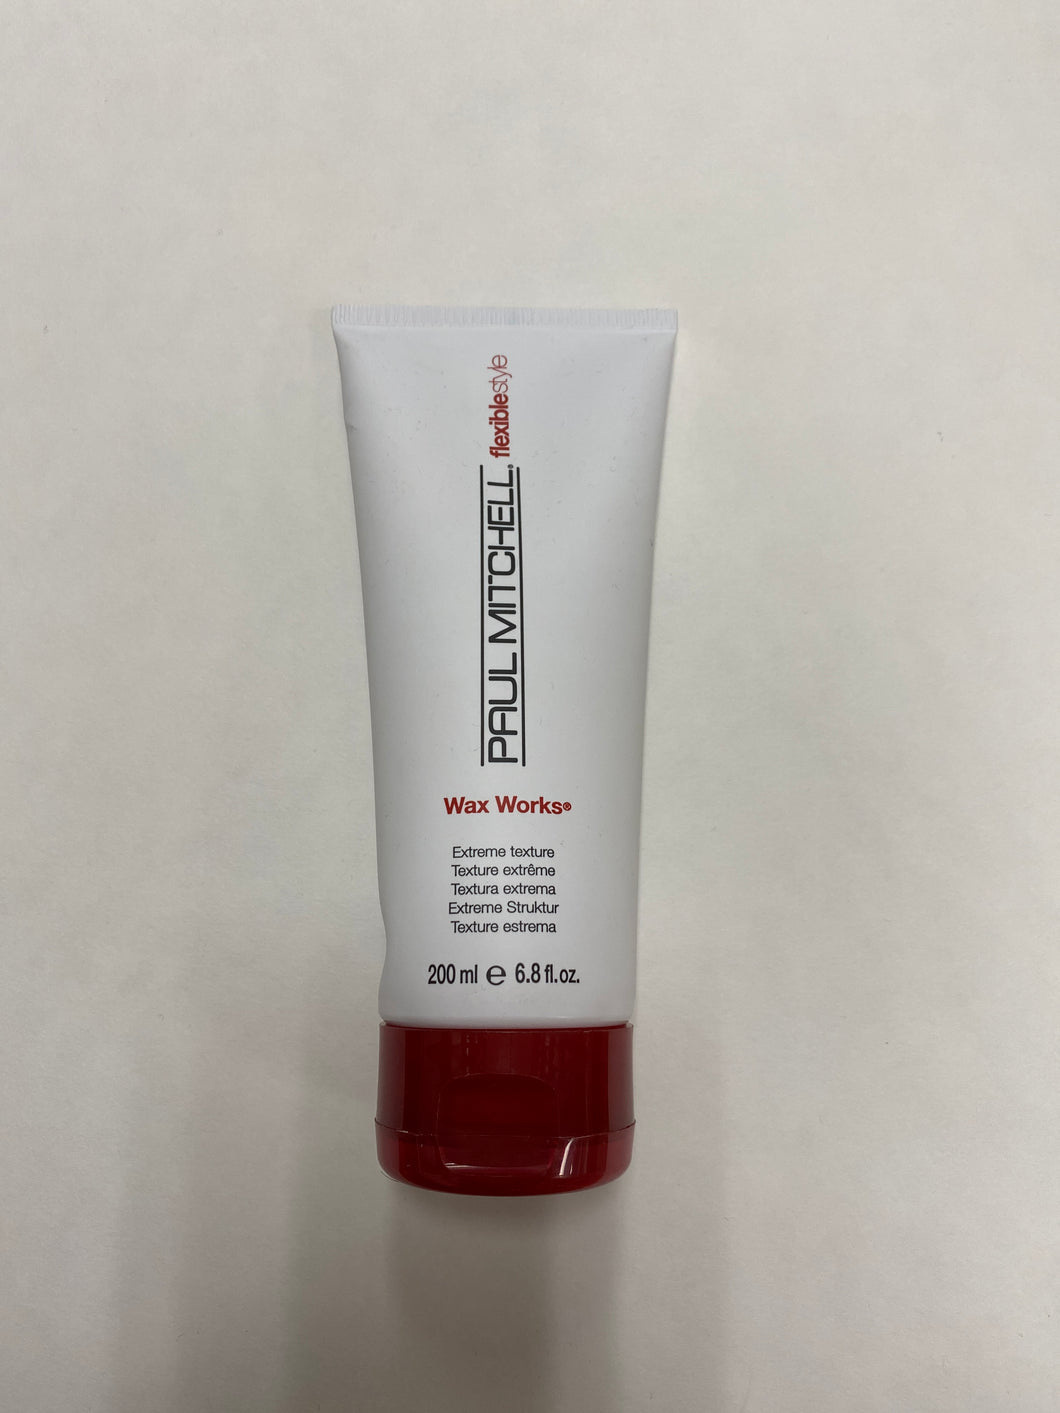 Paul Mitchell Wax Works Extreme Texture